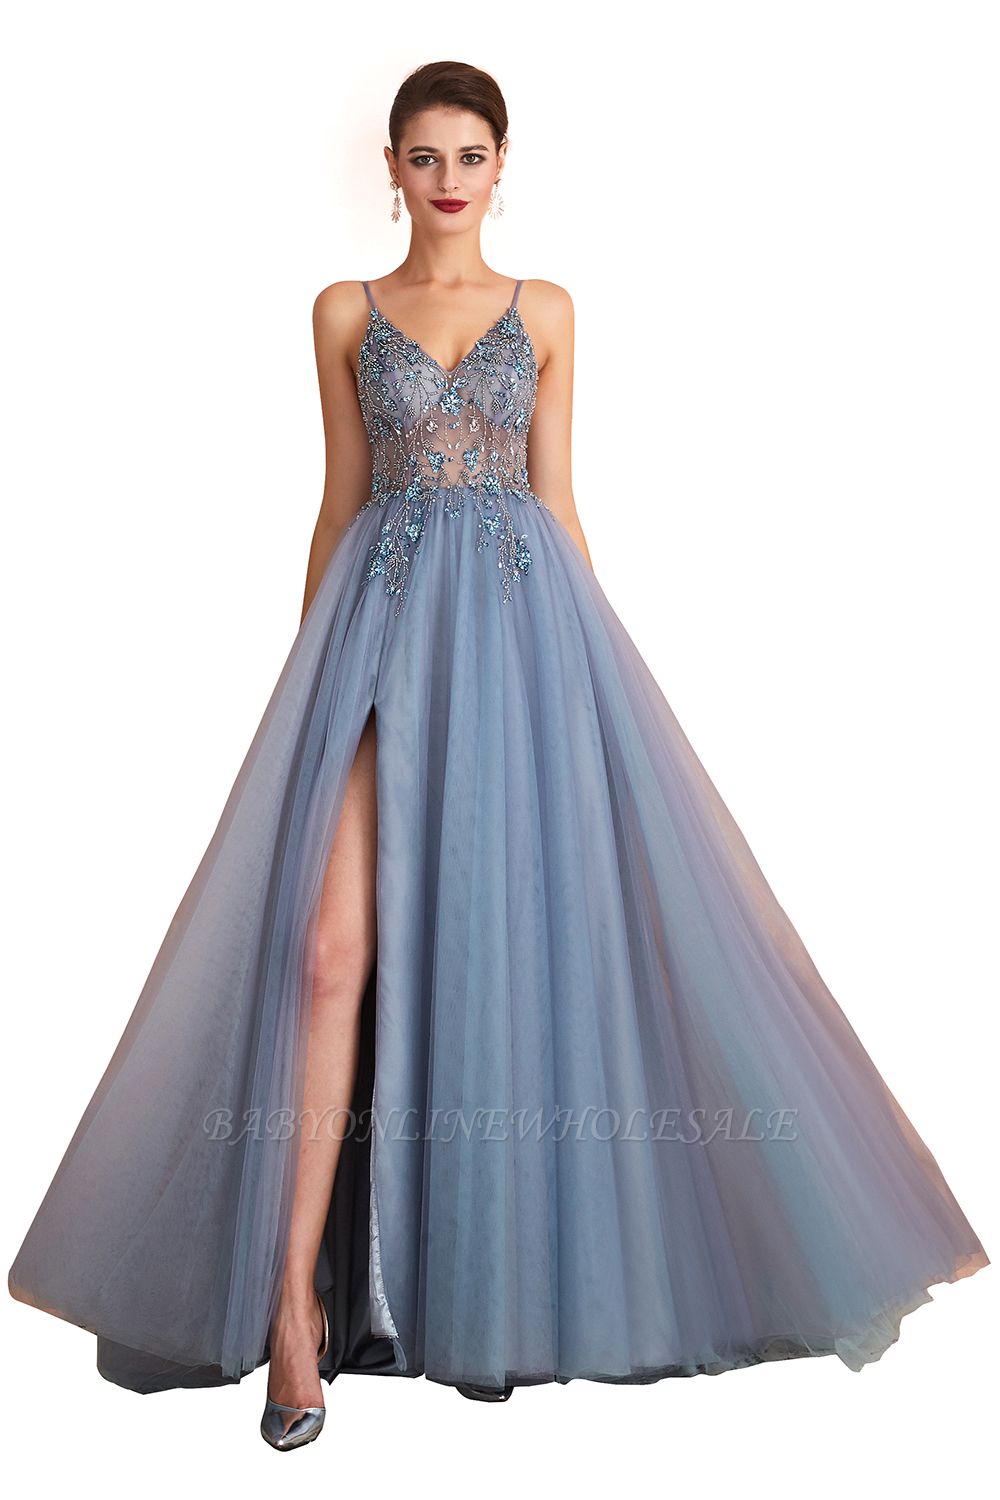 Charlotte | New Arrival Dusty Blue, Pink Spaghetti Strap Prom Dress with Sexy High Split, Evening Gowns Online